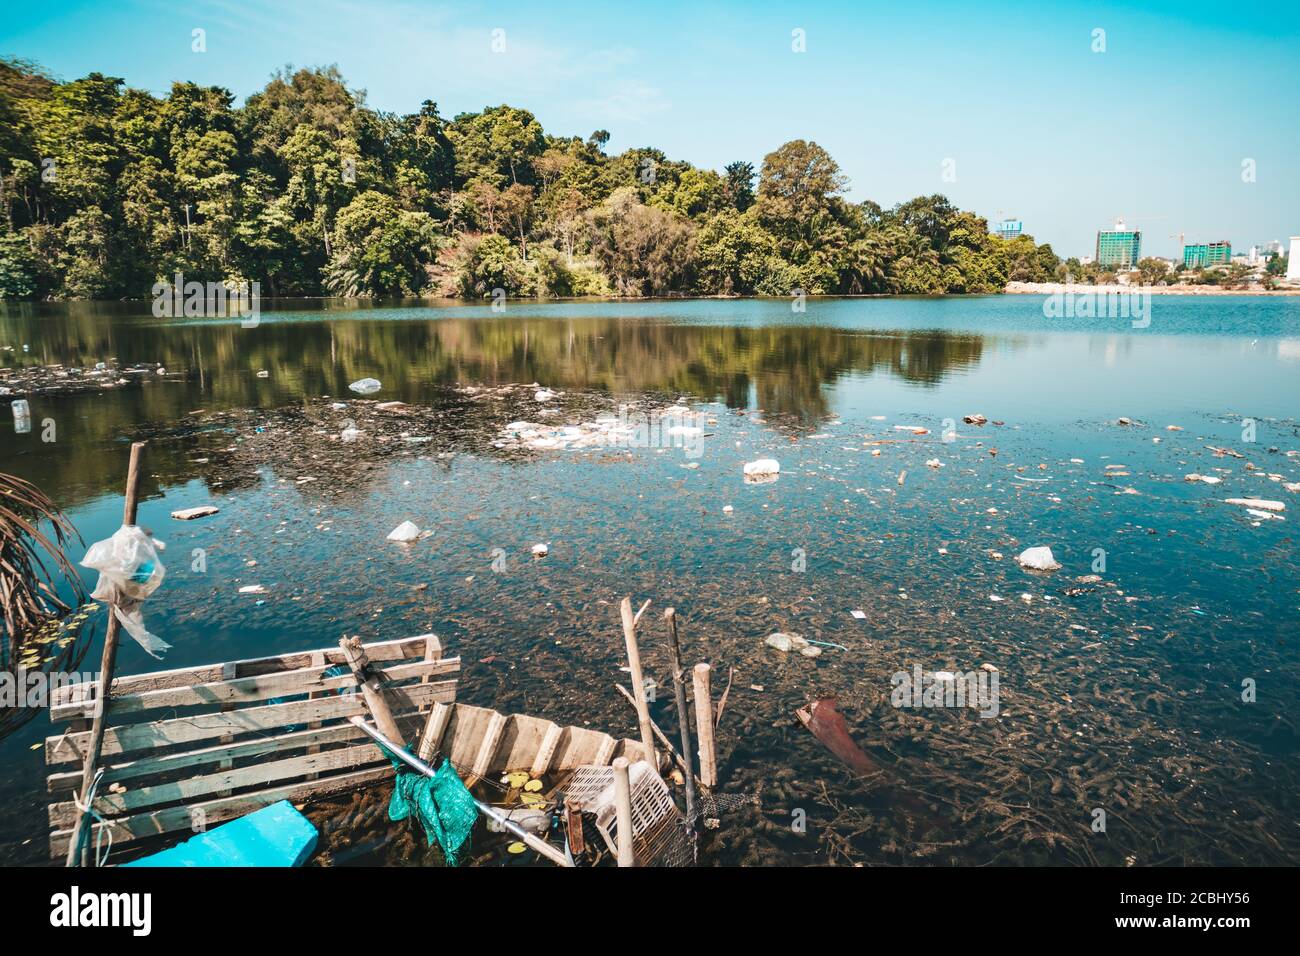 City dump in the pond in Park. Garbage lies in the water on one of the urban landscape. plastic bottles were thrown into the water. Stock Photo